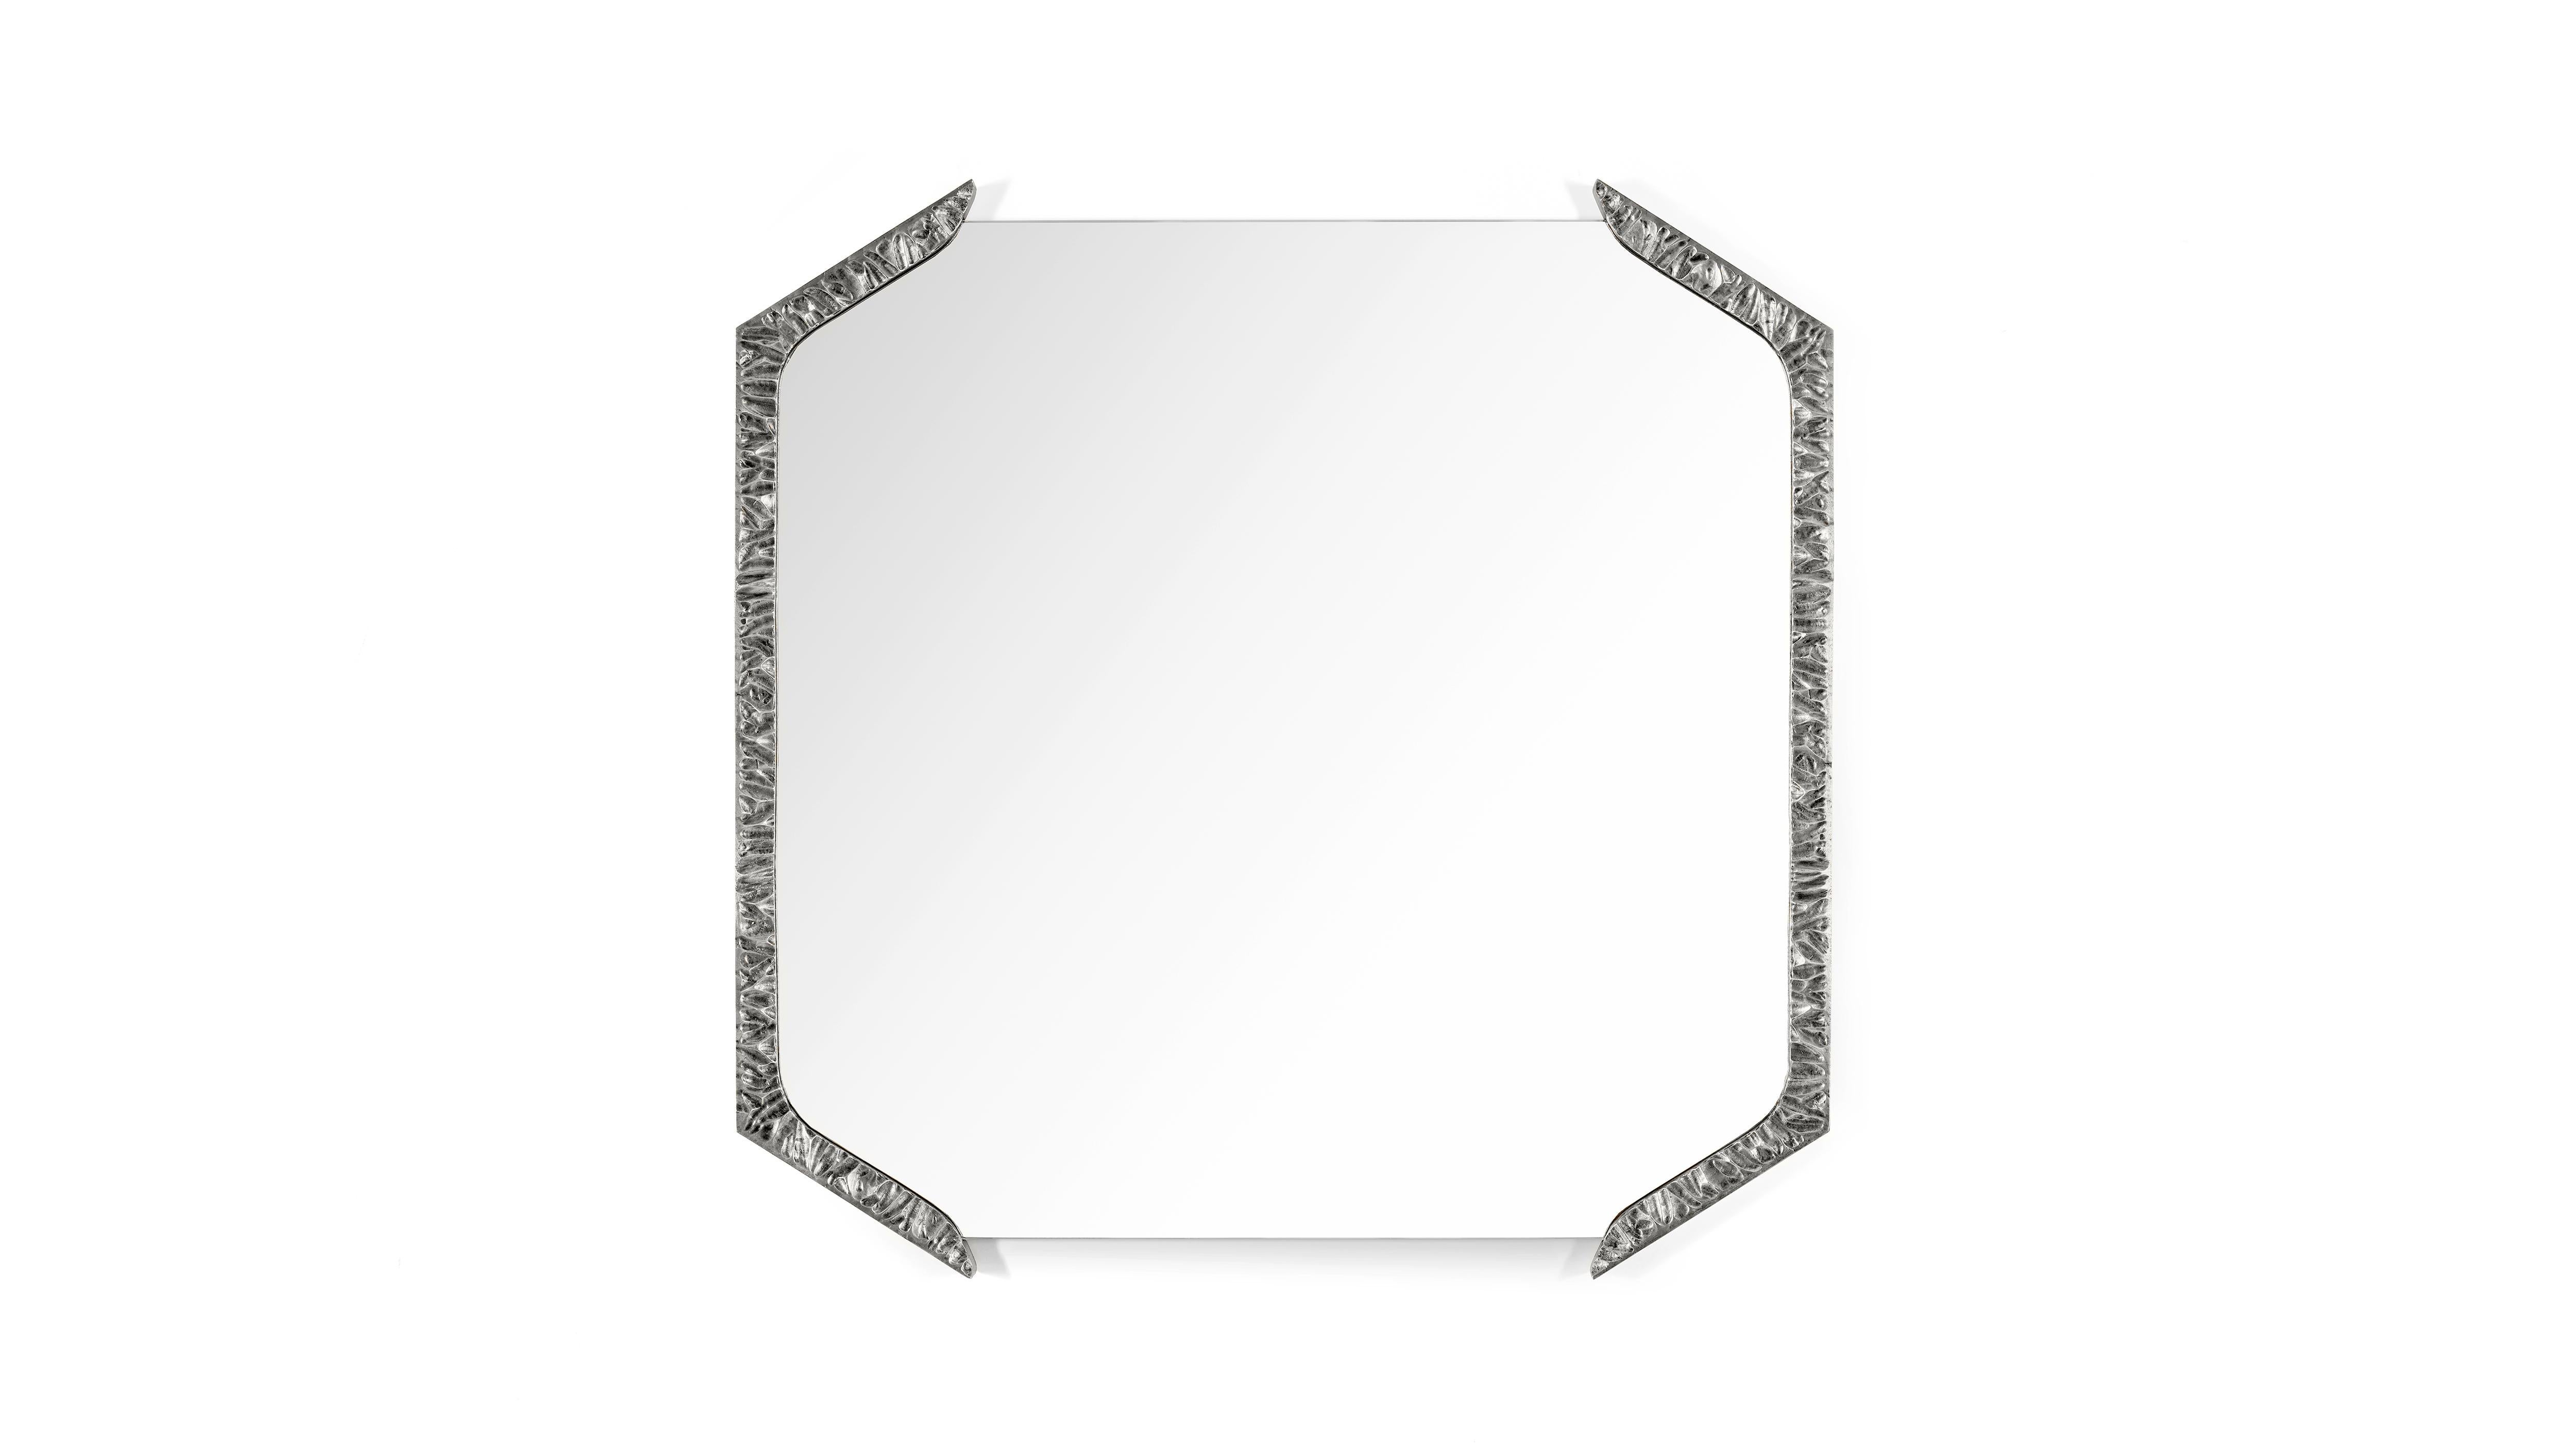 Alentejo Nickel Square Mirror by InsidherLand
Dimensions: D 3 x W 85 x H 85 cm.
Materials: Cast brass covered by nickel bath, clear mirror.
22 kg.
Available in other finishes.

Alentejo mirror has the similar conceptual approach to the typical cork